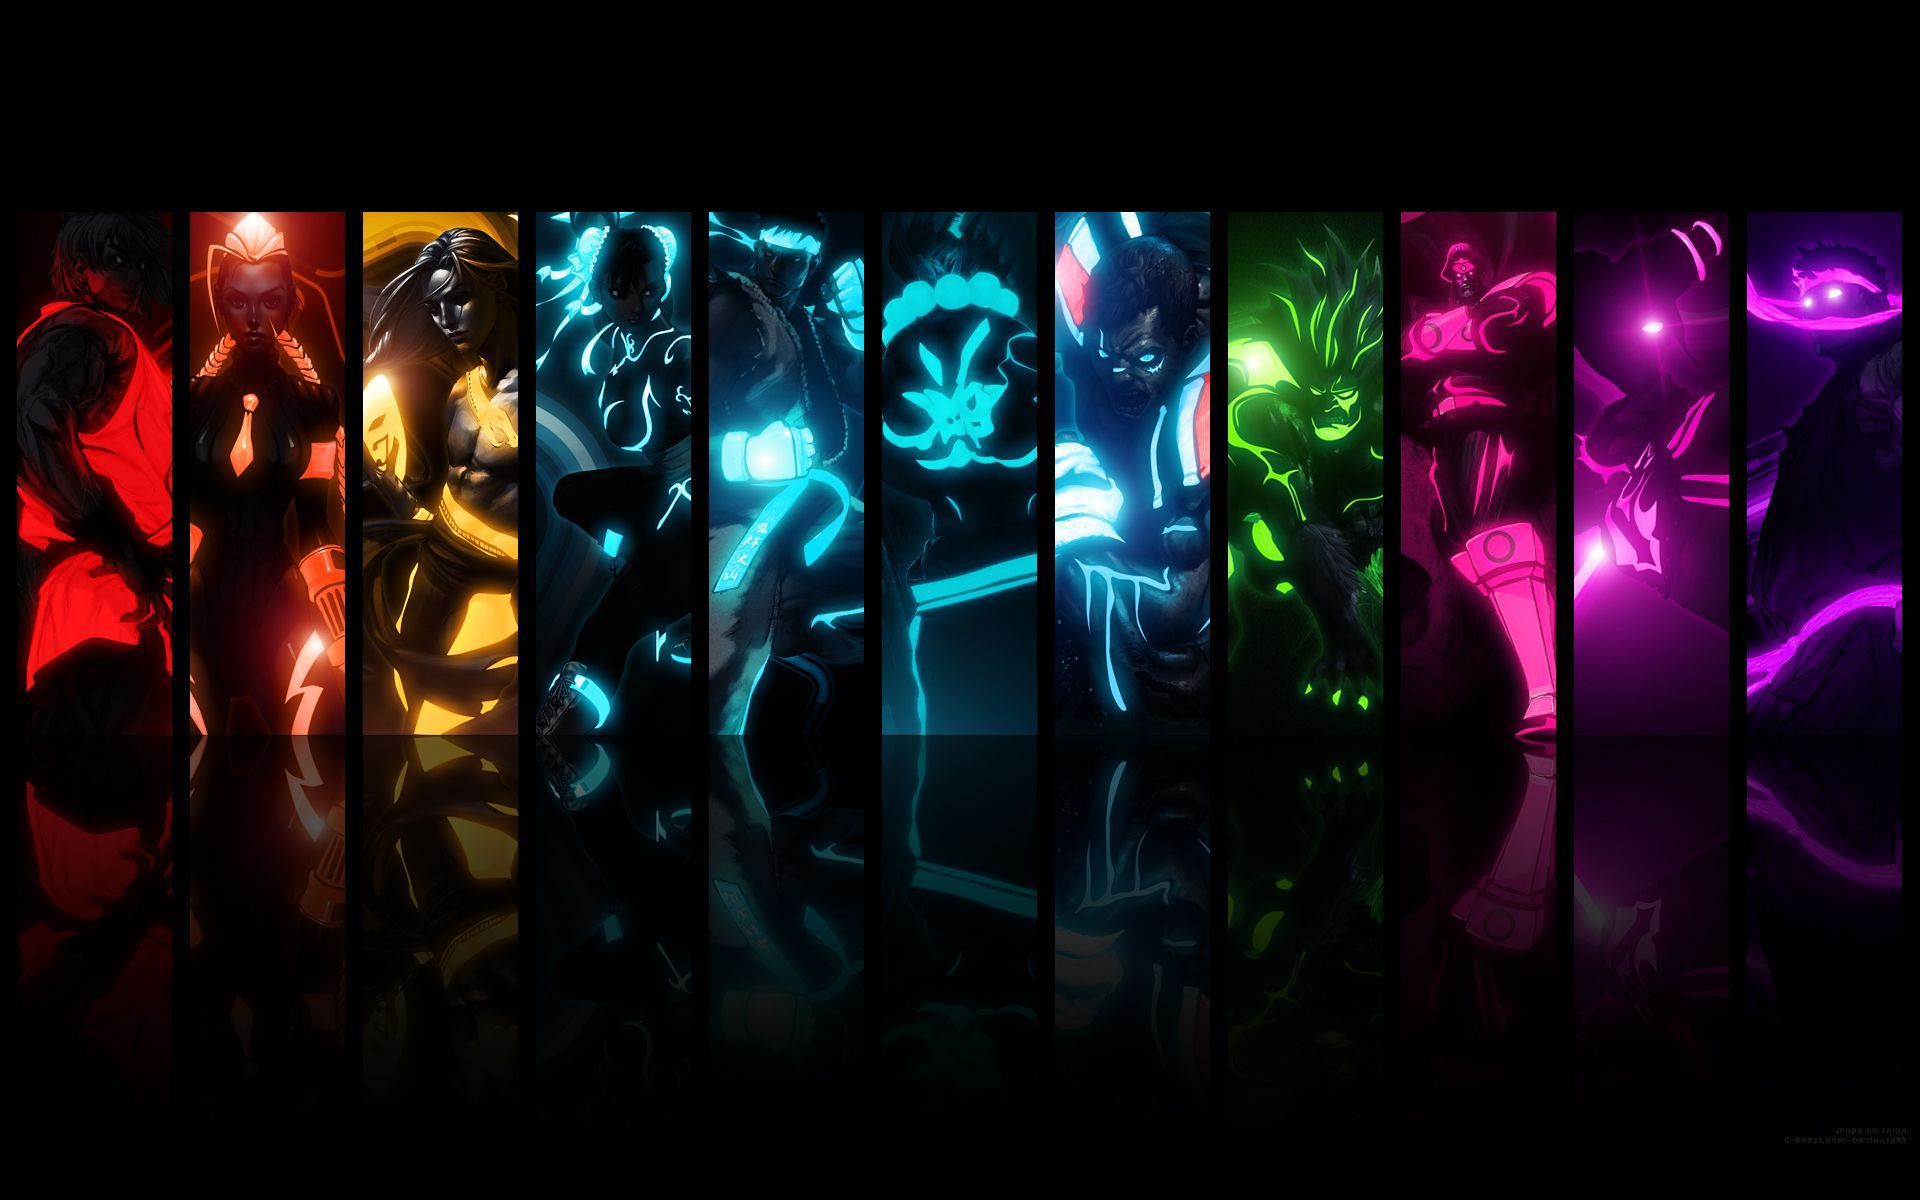 Tron Street Fighters Charaters. Cool anime wallpaper, HD anime